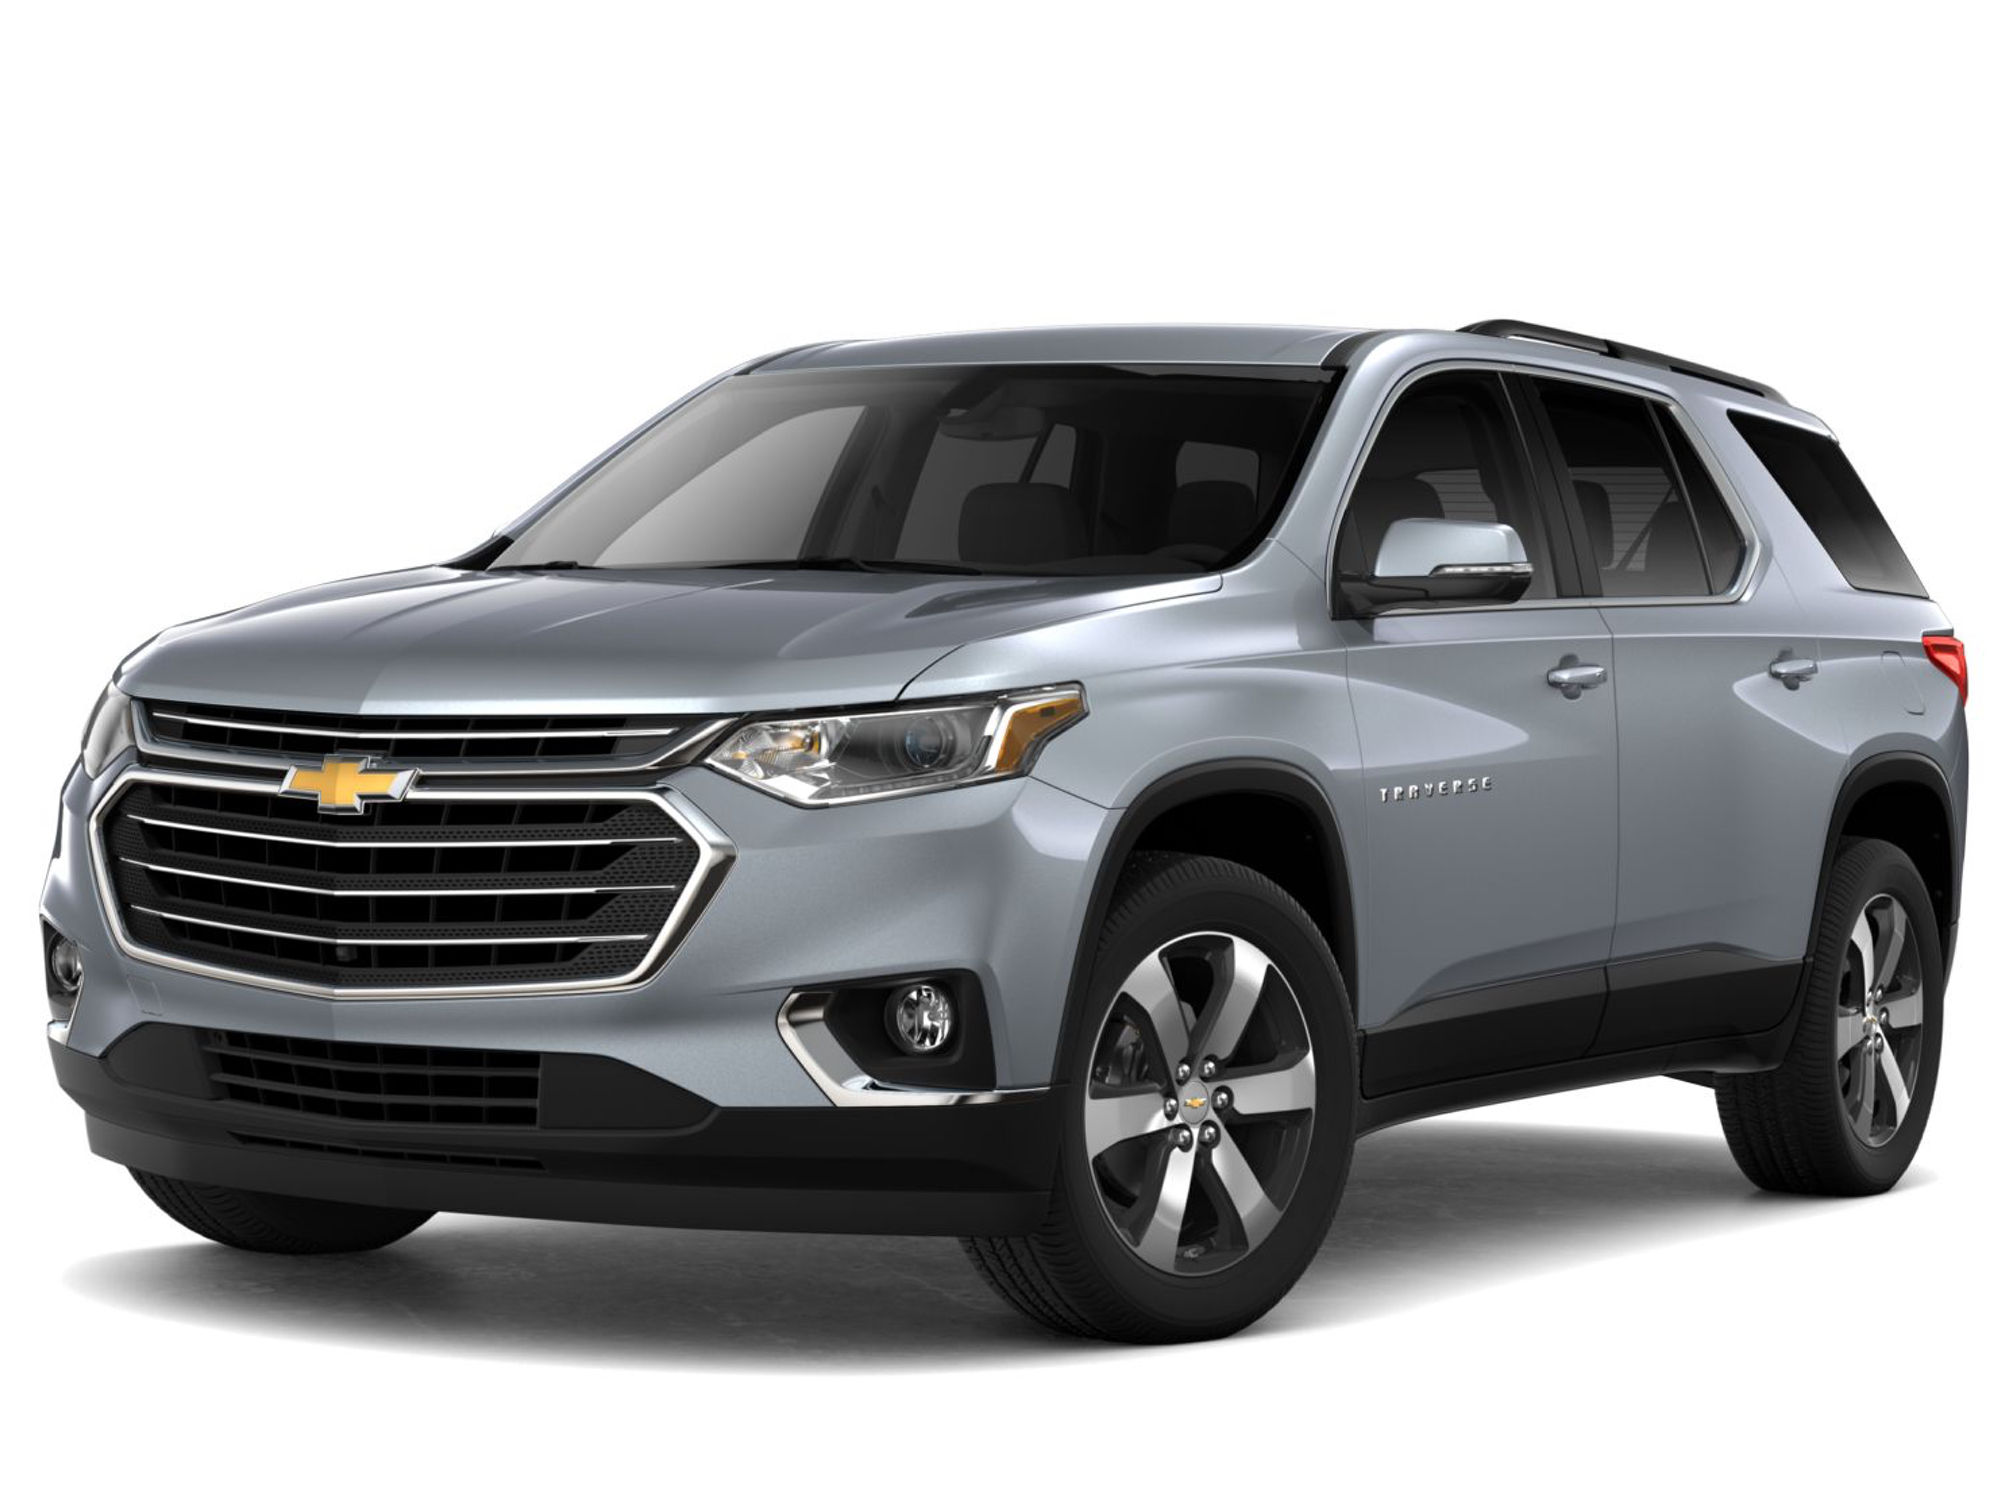 2019 Chevy Traverse Adds Upscale LT Premium Package | GM Authority